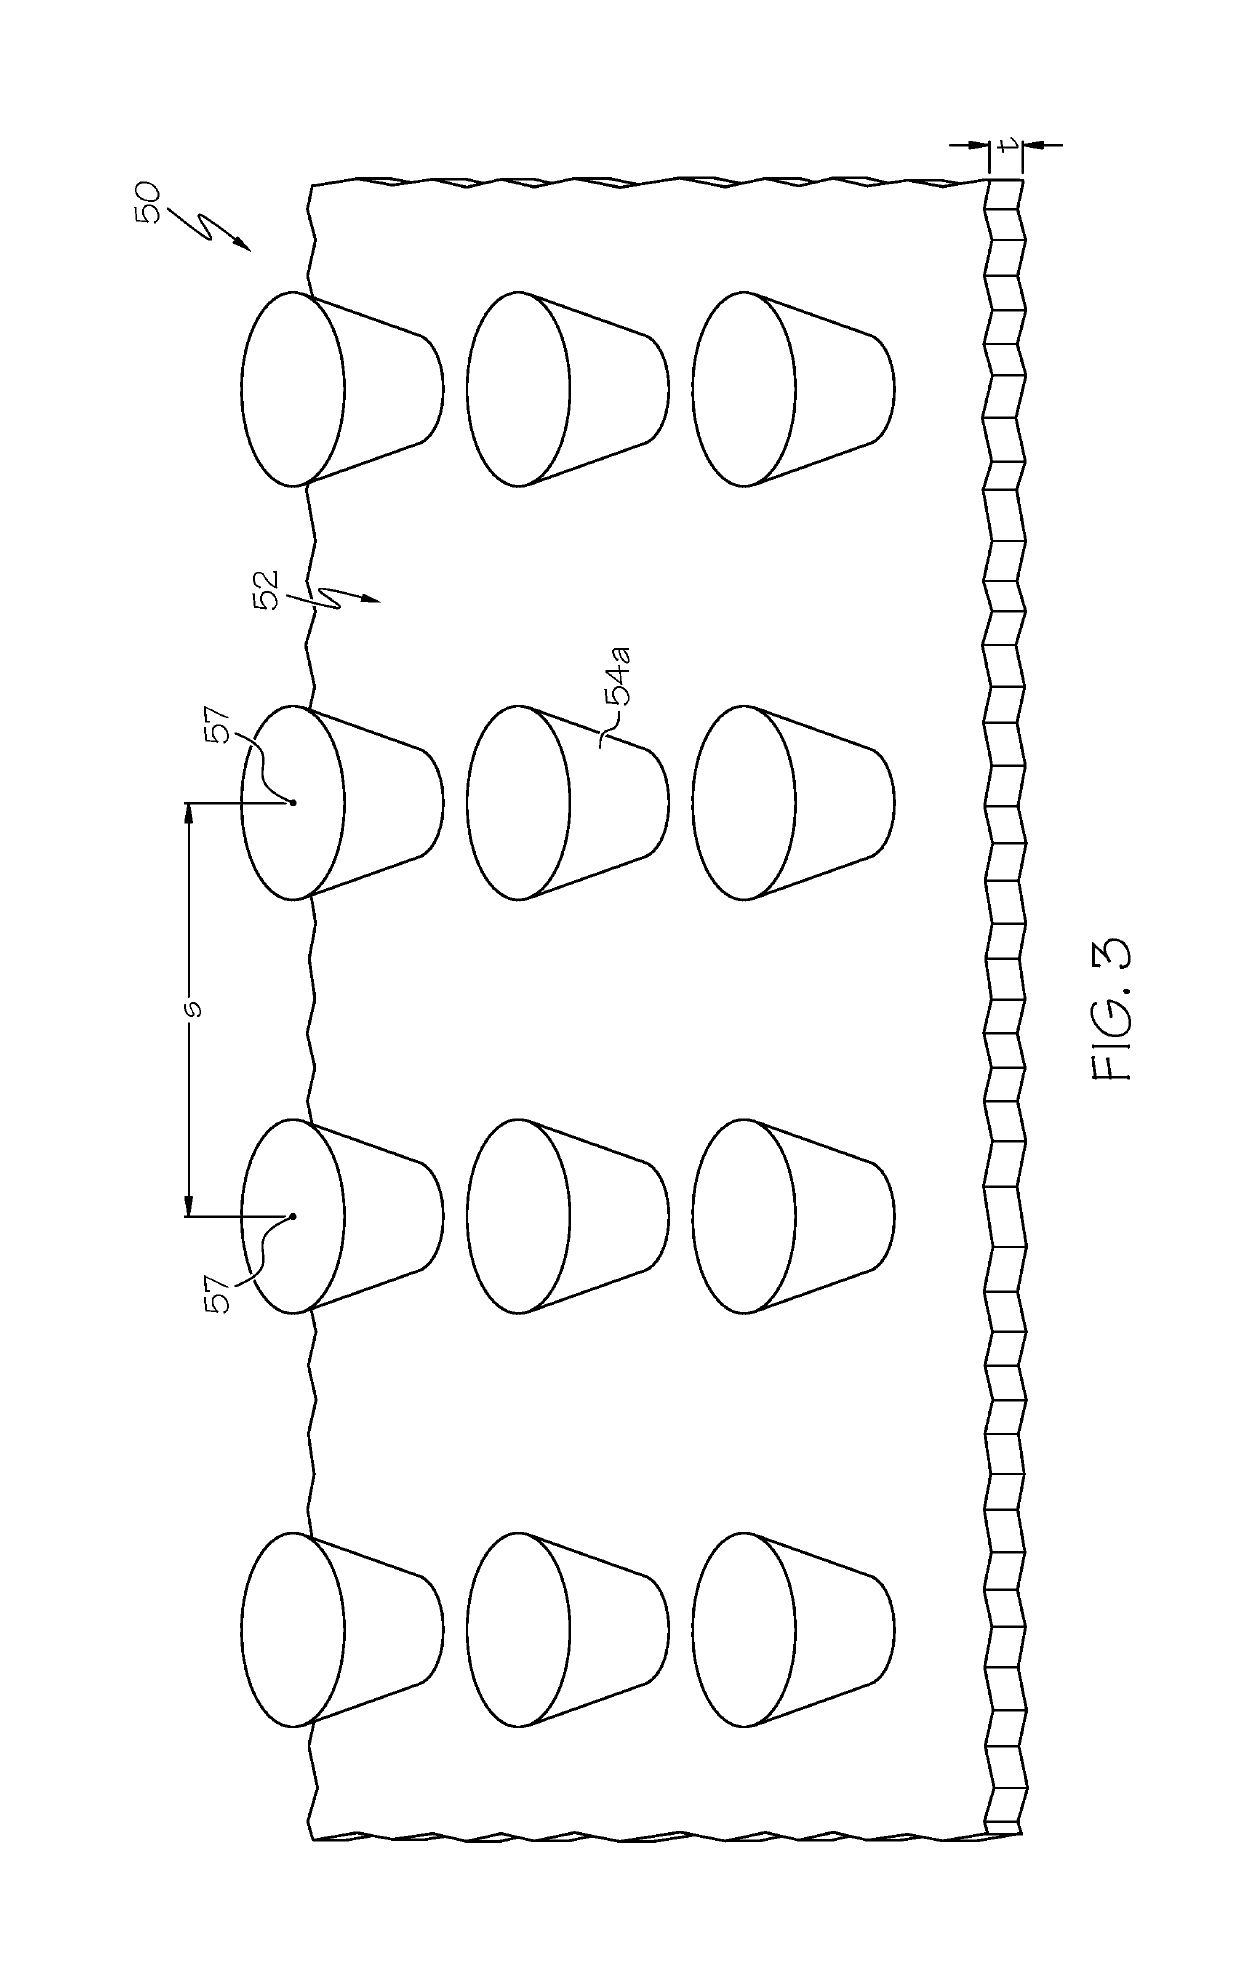 Covered endoscopic stents with adhesion elements